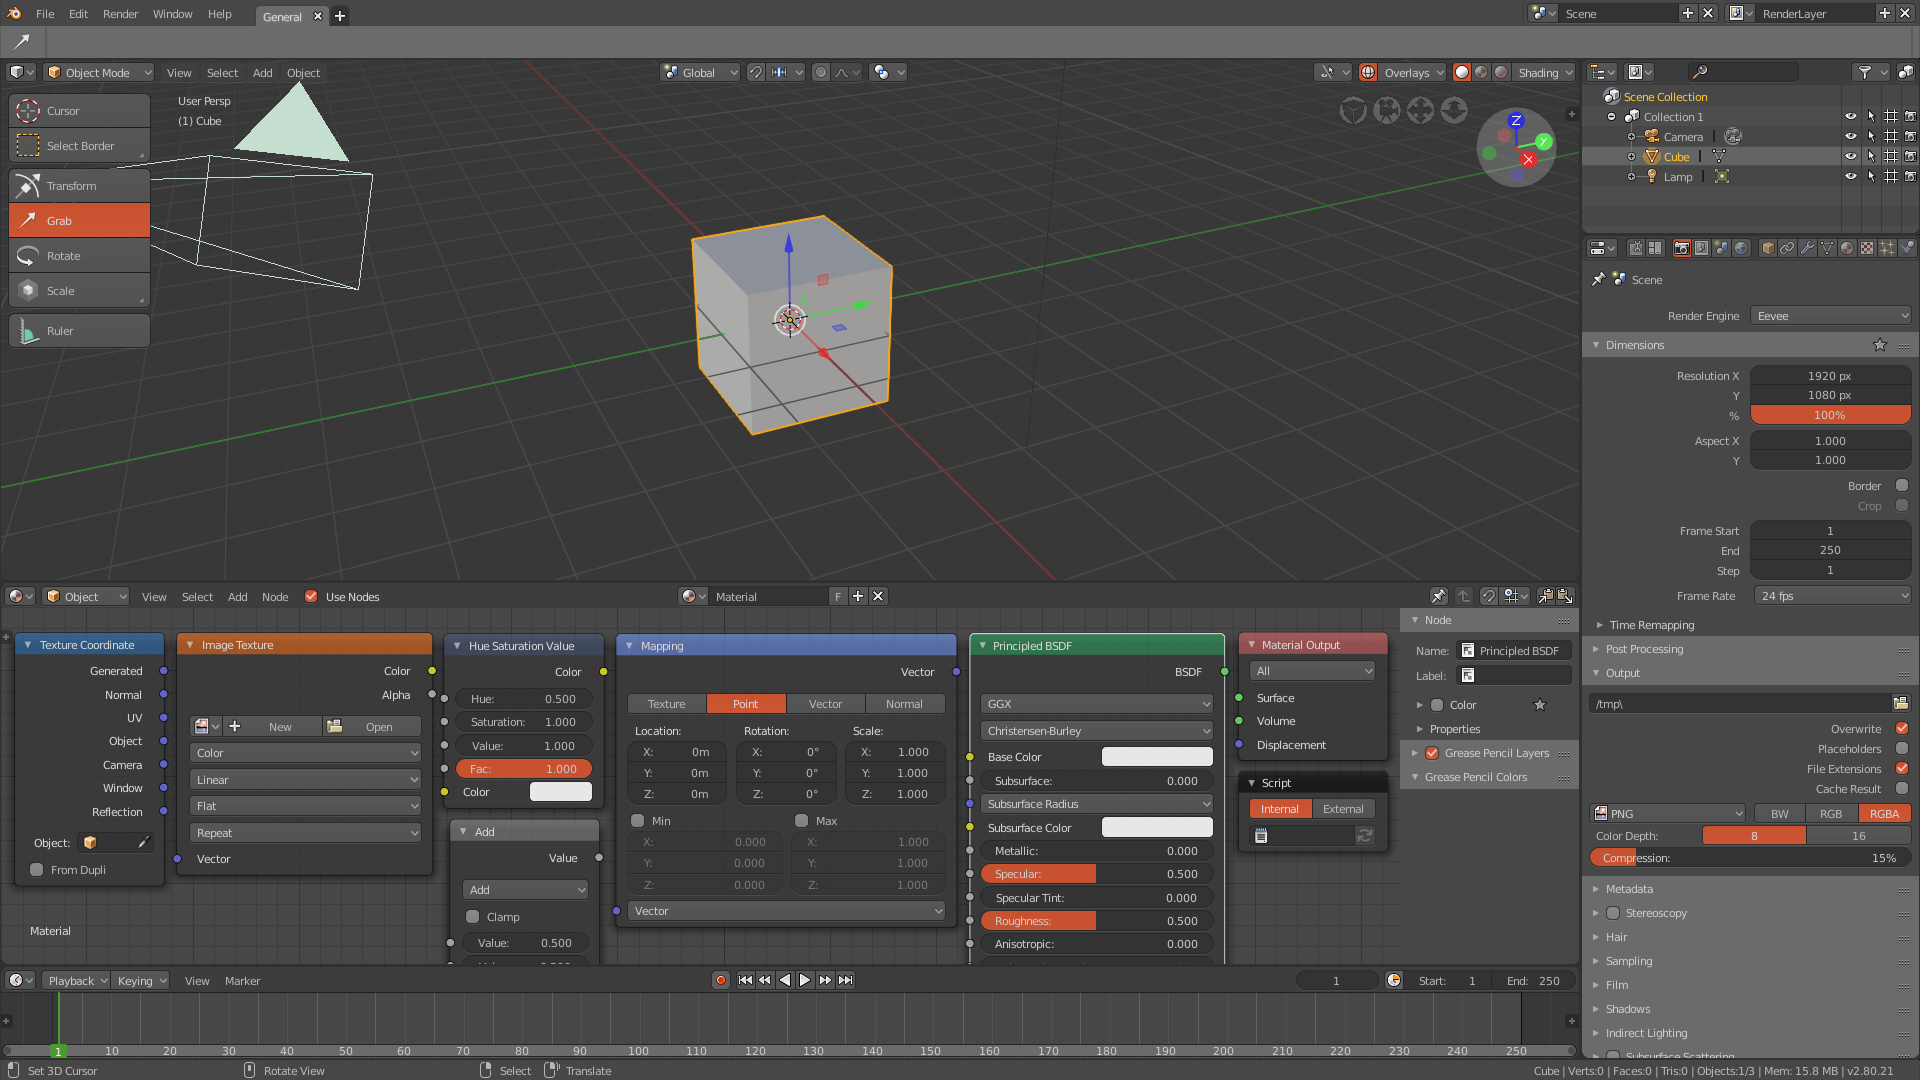 Awesome - Theme for Blender 2.8 - Released Scripts and Themes - Blender Artists Community